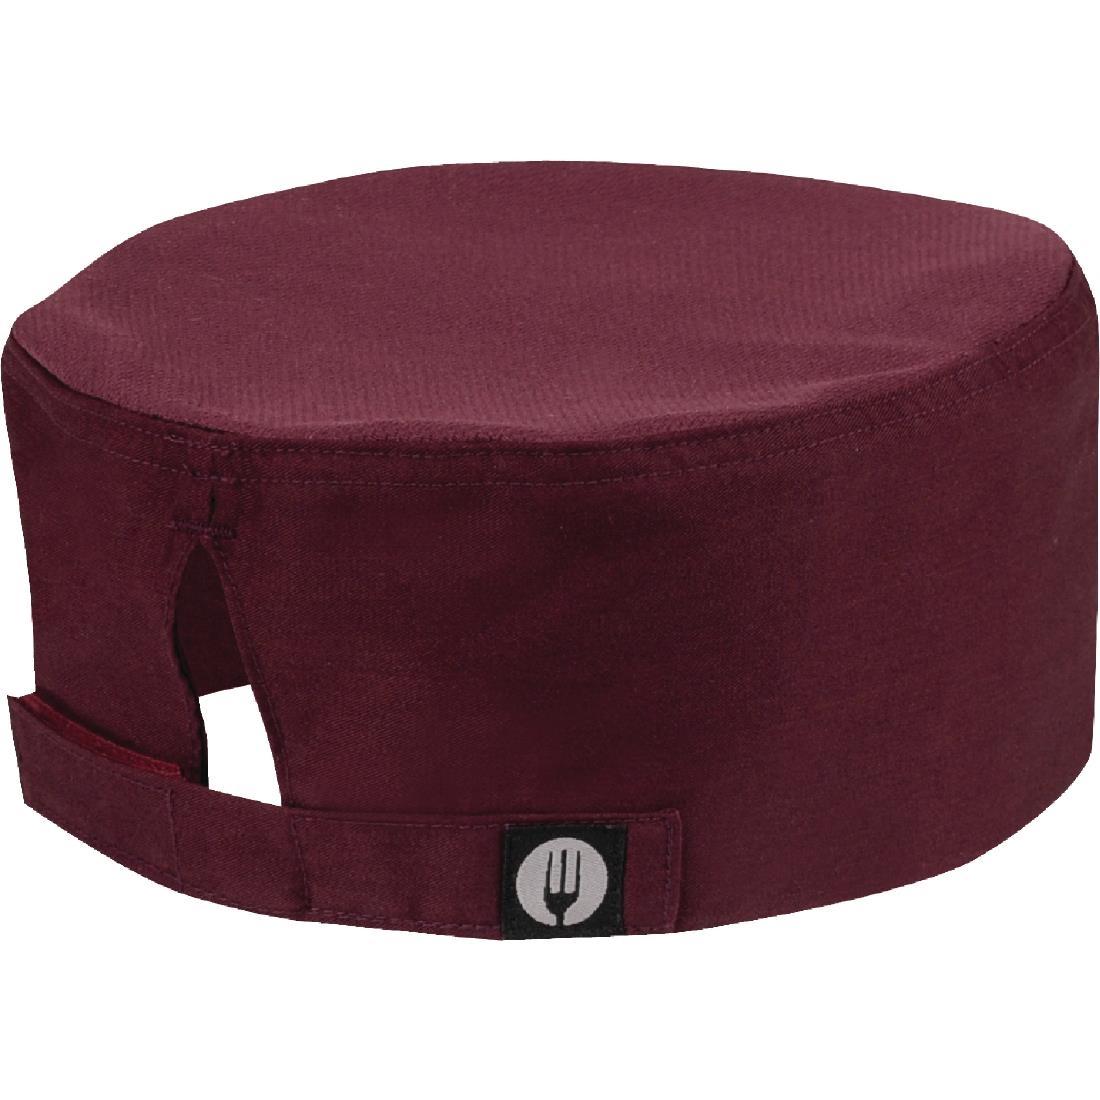 Chef Works Cool Vent Beanie Merlot - A920  - 1